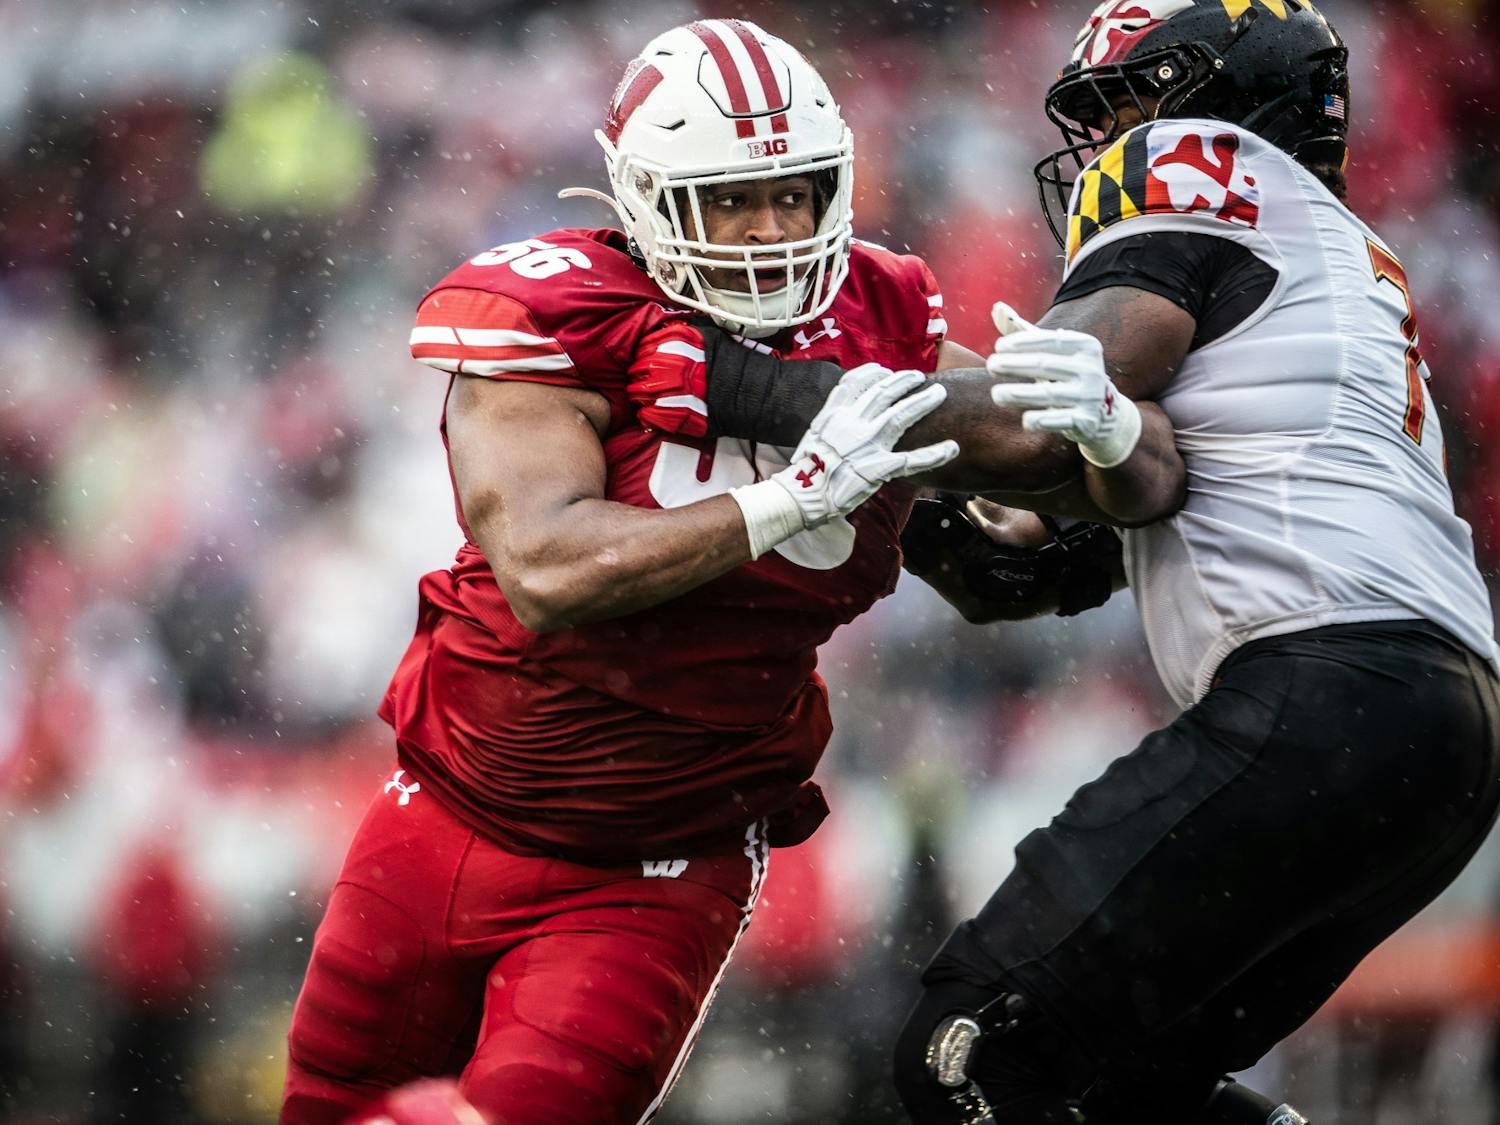 NFL Draft preview: Predicting Badger landing spots - The Daily Cardinal